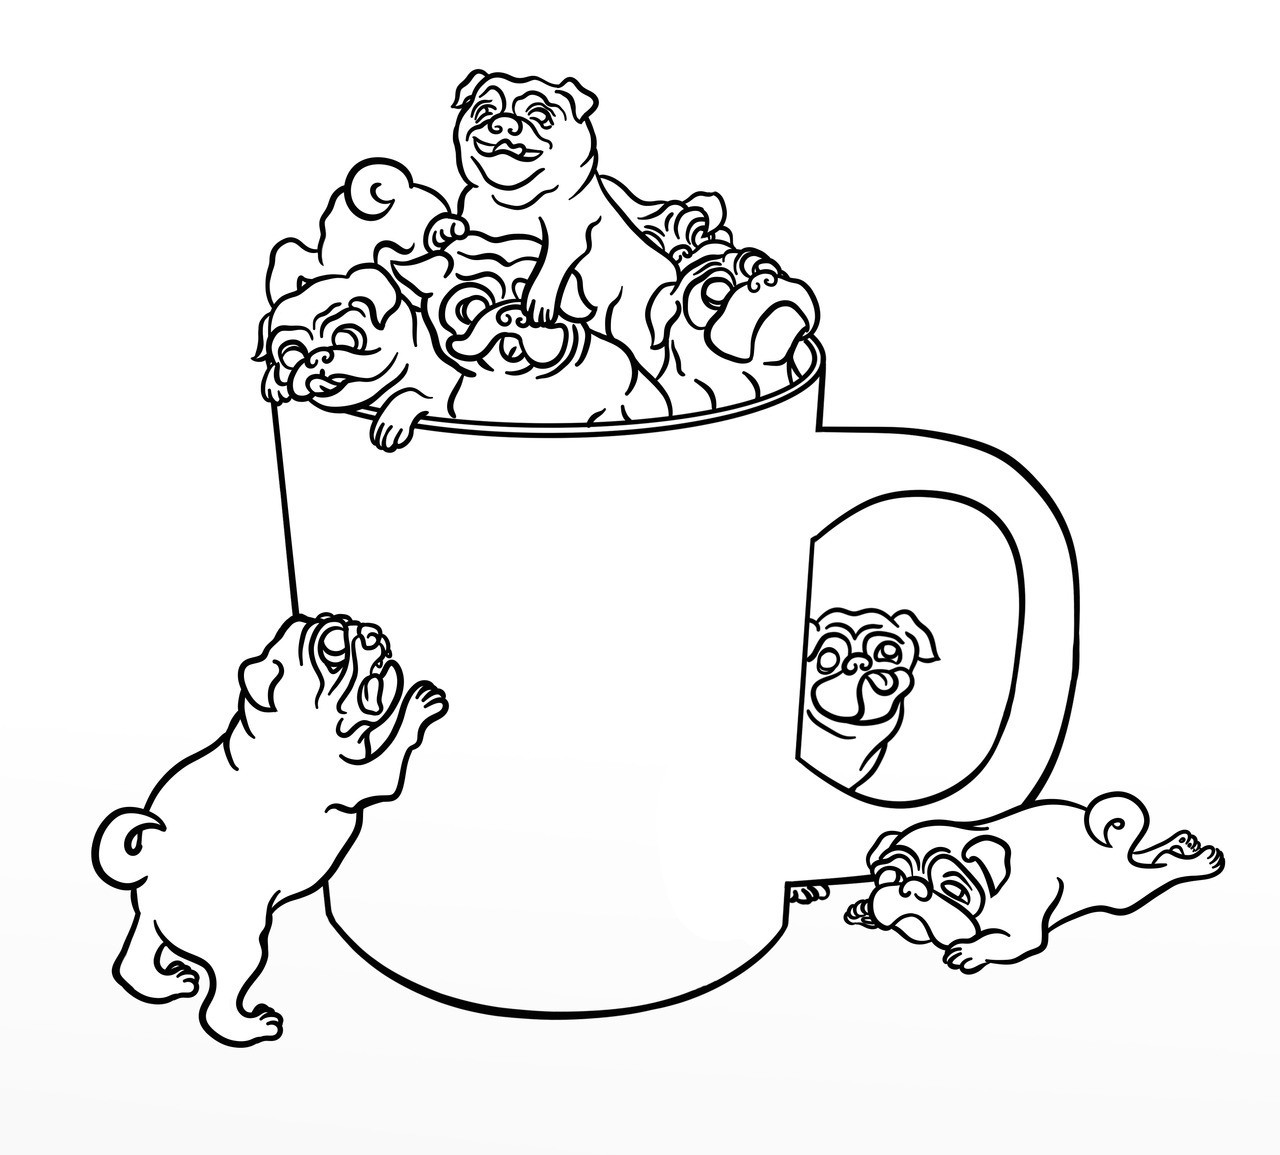 Baby Pug Coloring Pages
 wallpaper Wallpaper Lds